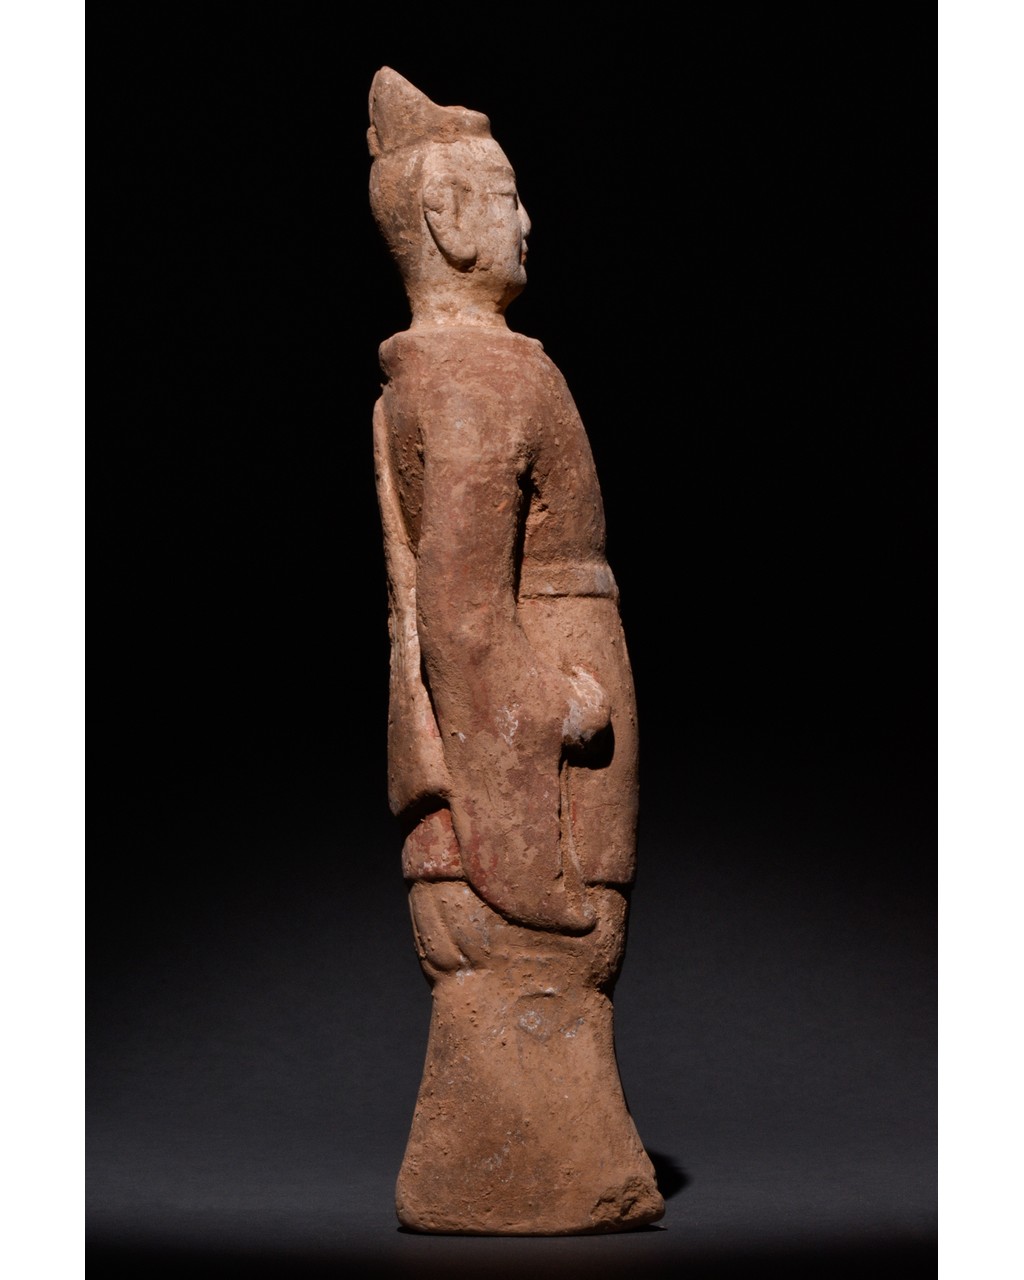 NORTHERN WEI TERRACOTTA PAINTED FIGURE - Image 4 of 6